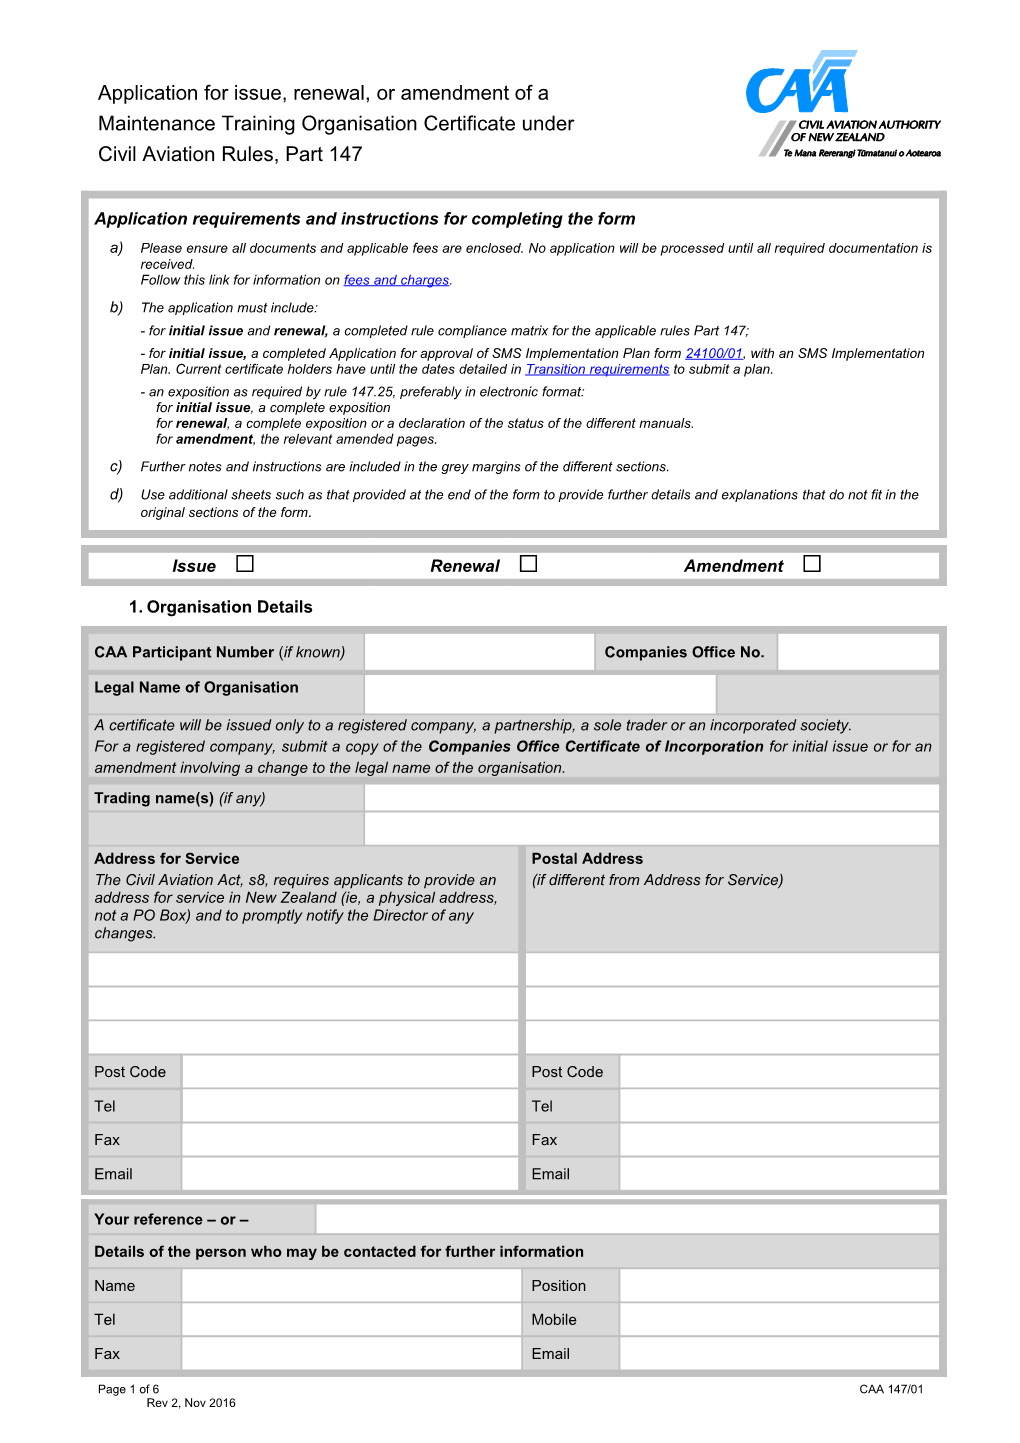 Application Requirements and Instructions for Completing the Form